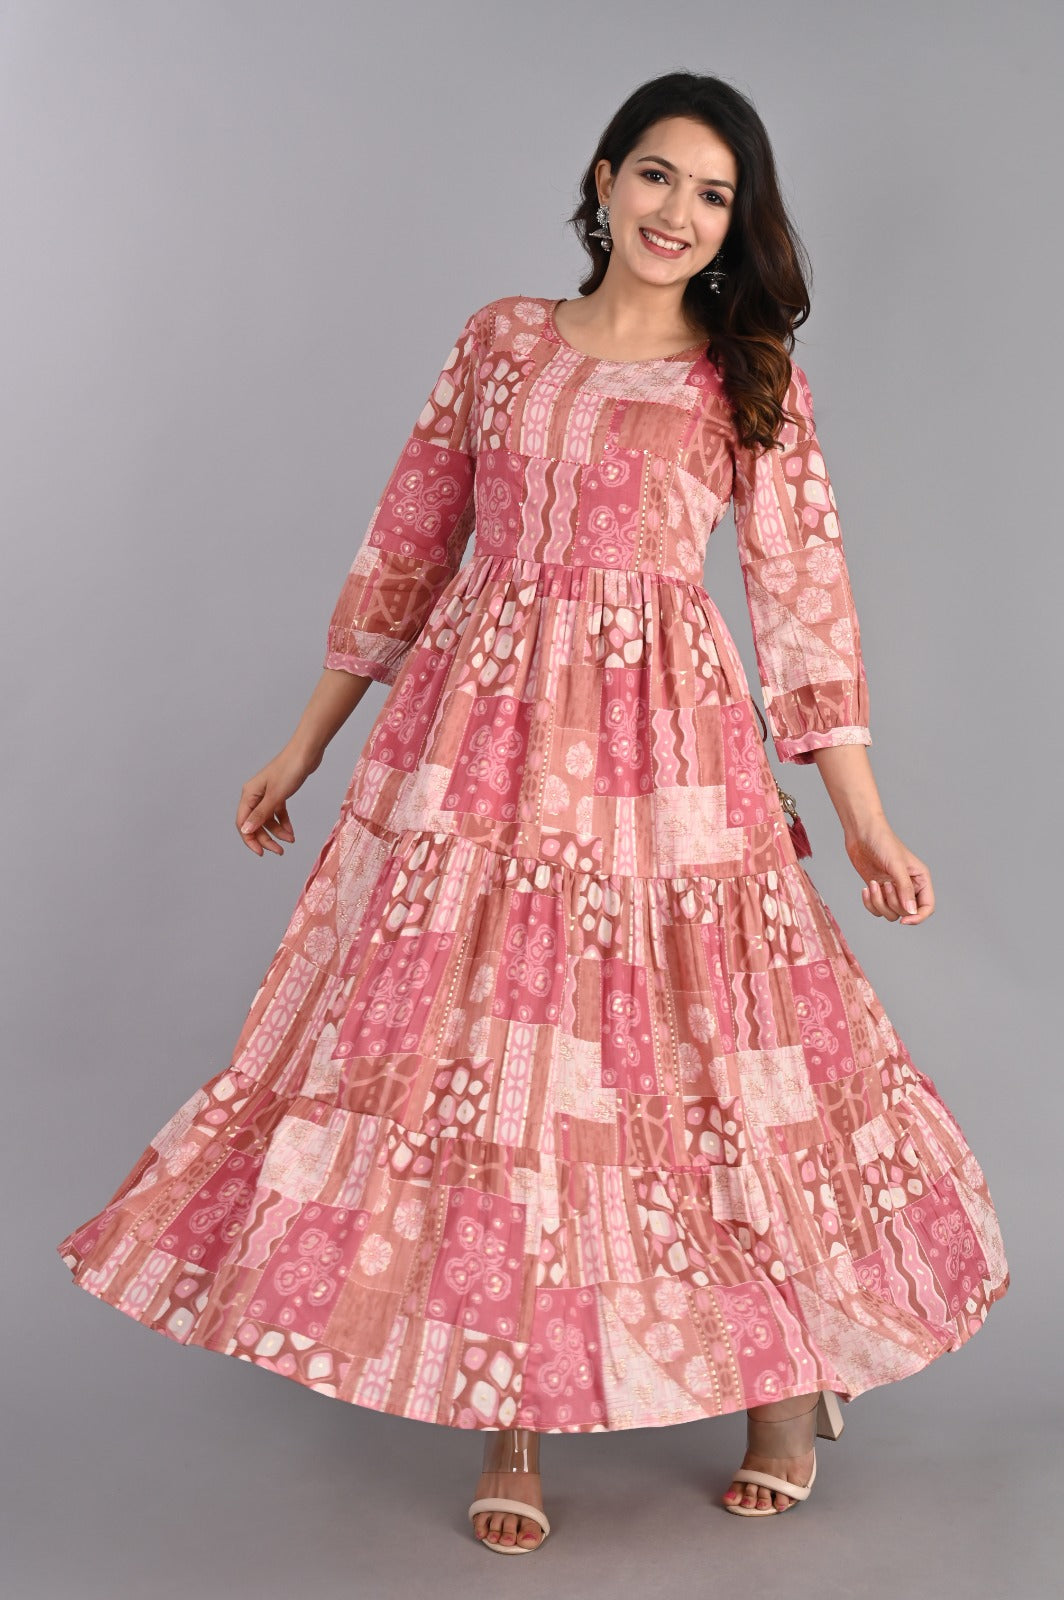 Abstract Print Pink Tiered Dress